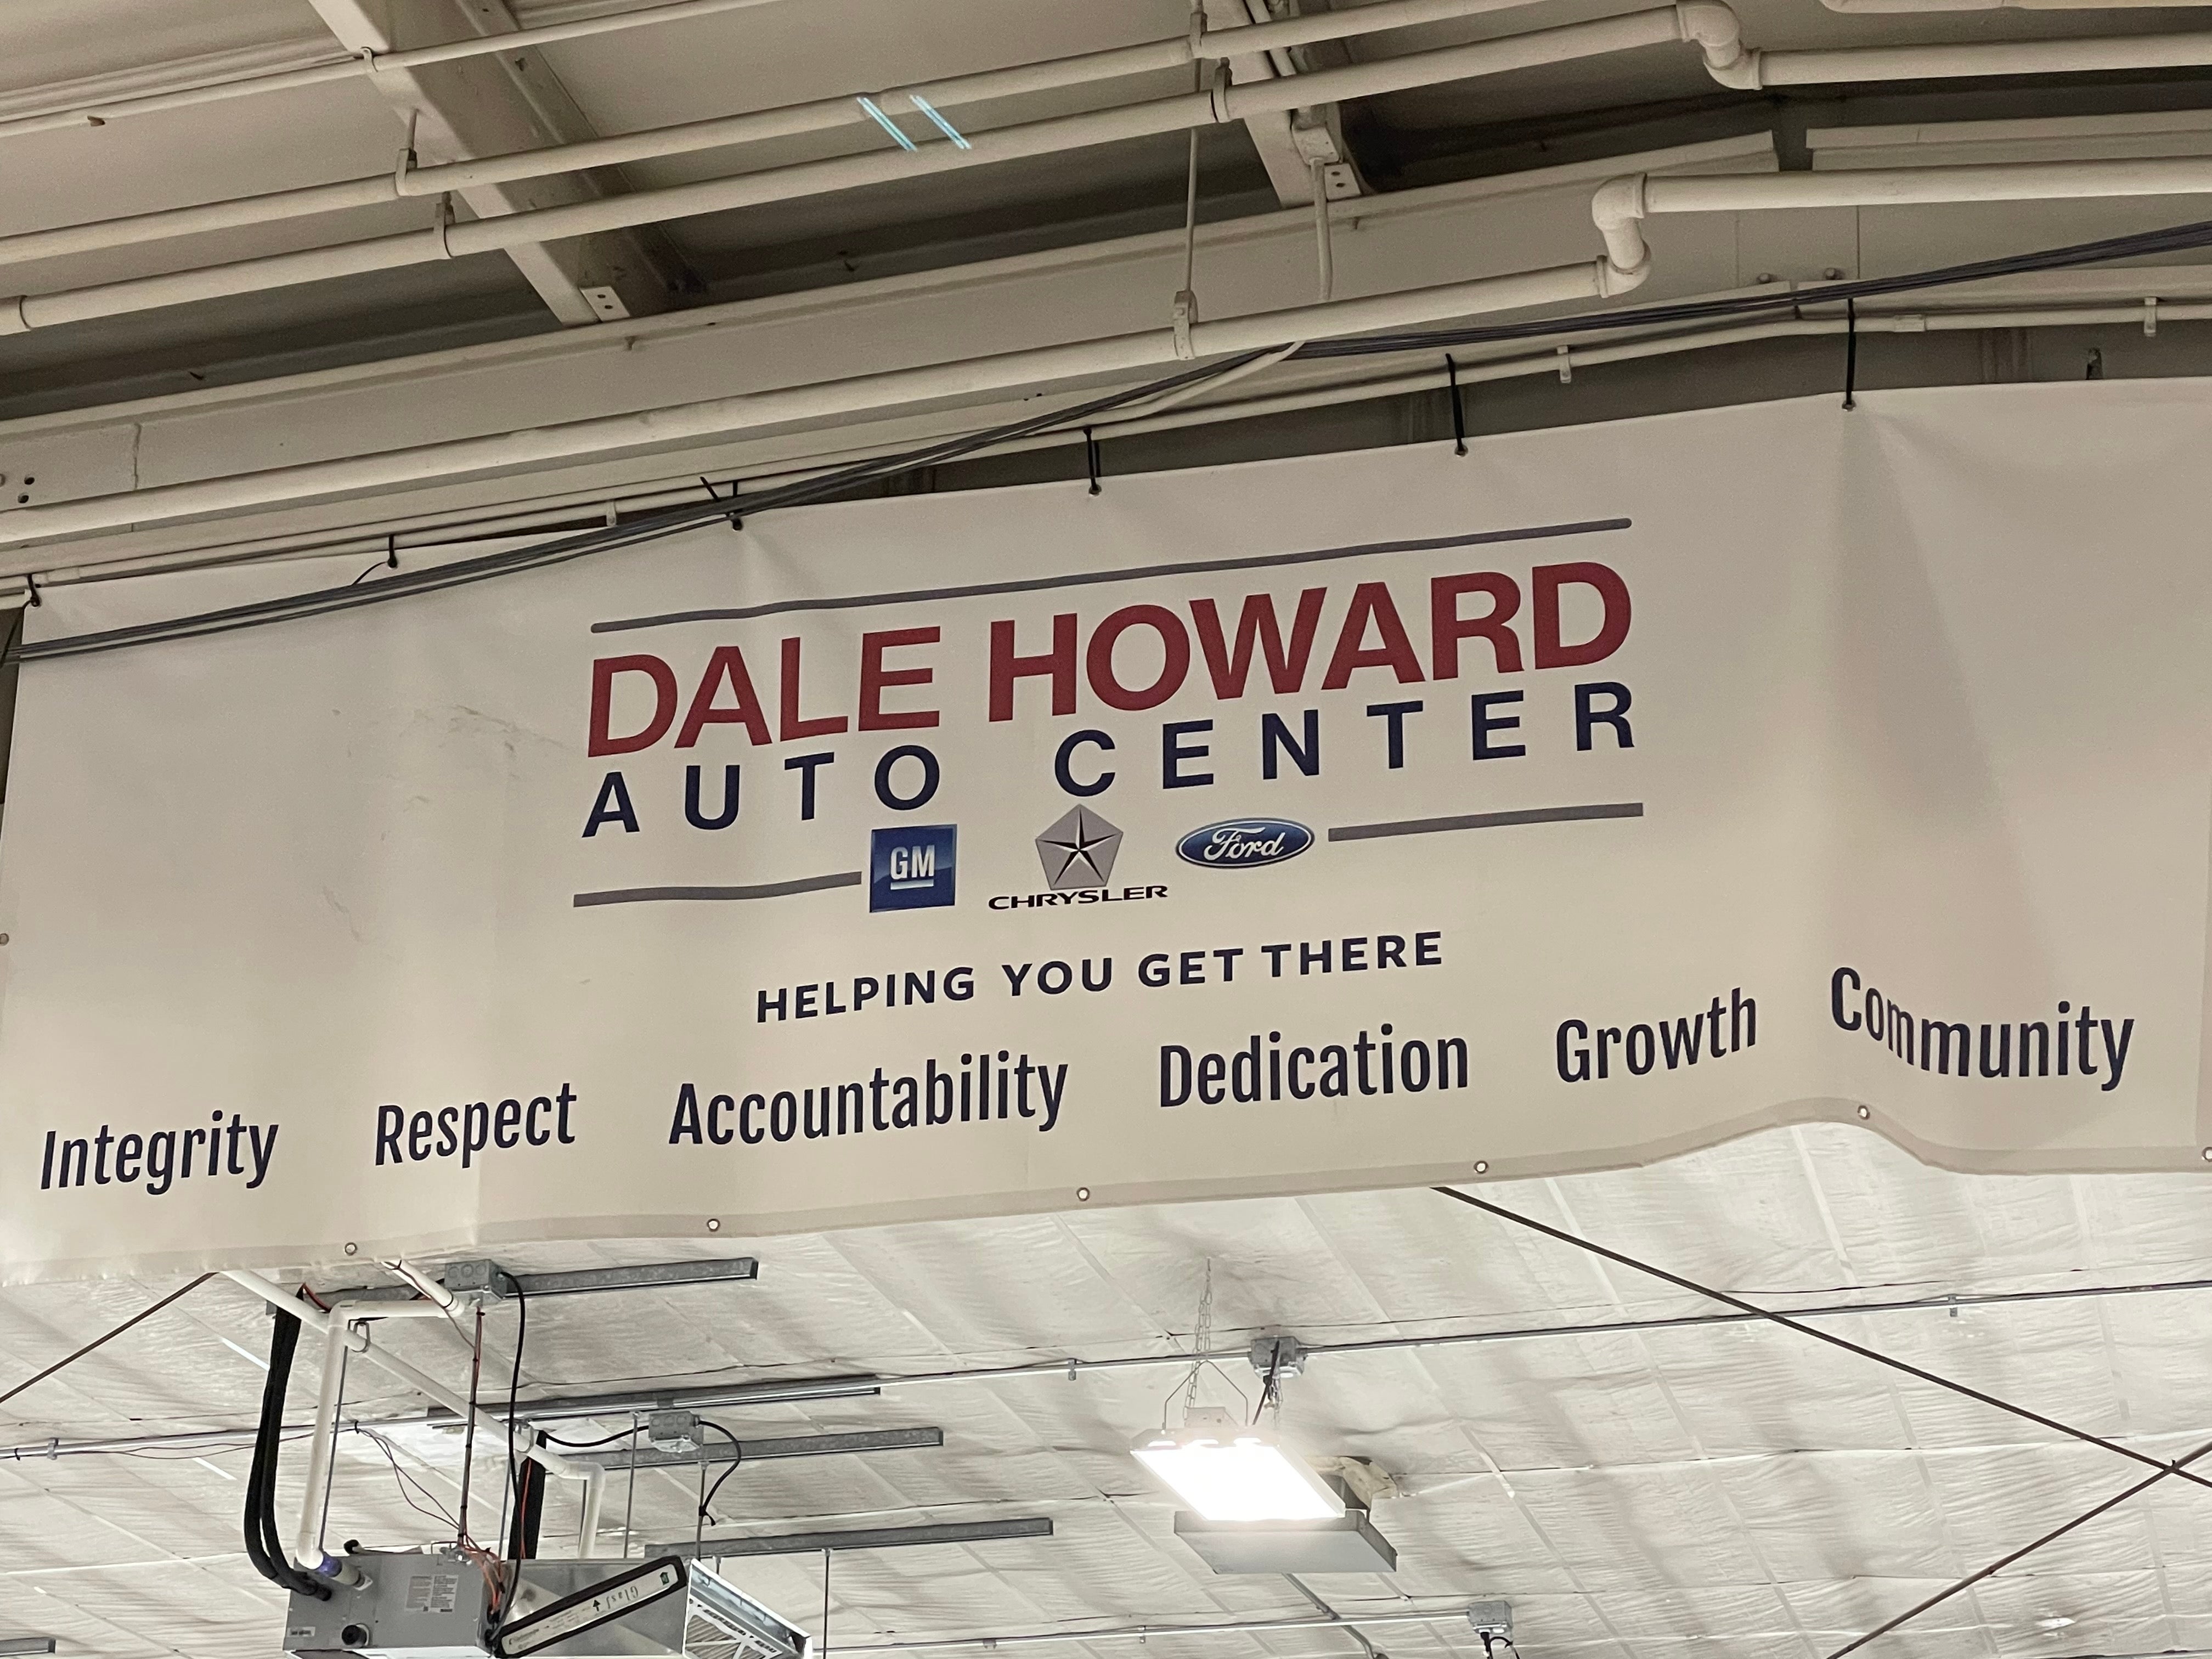 Exceptional service at Dale Howard Auto Center